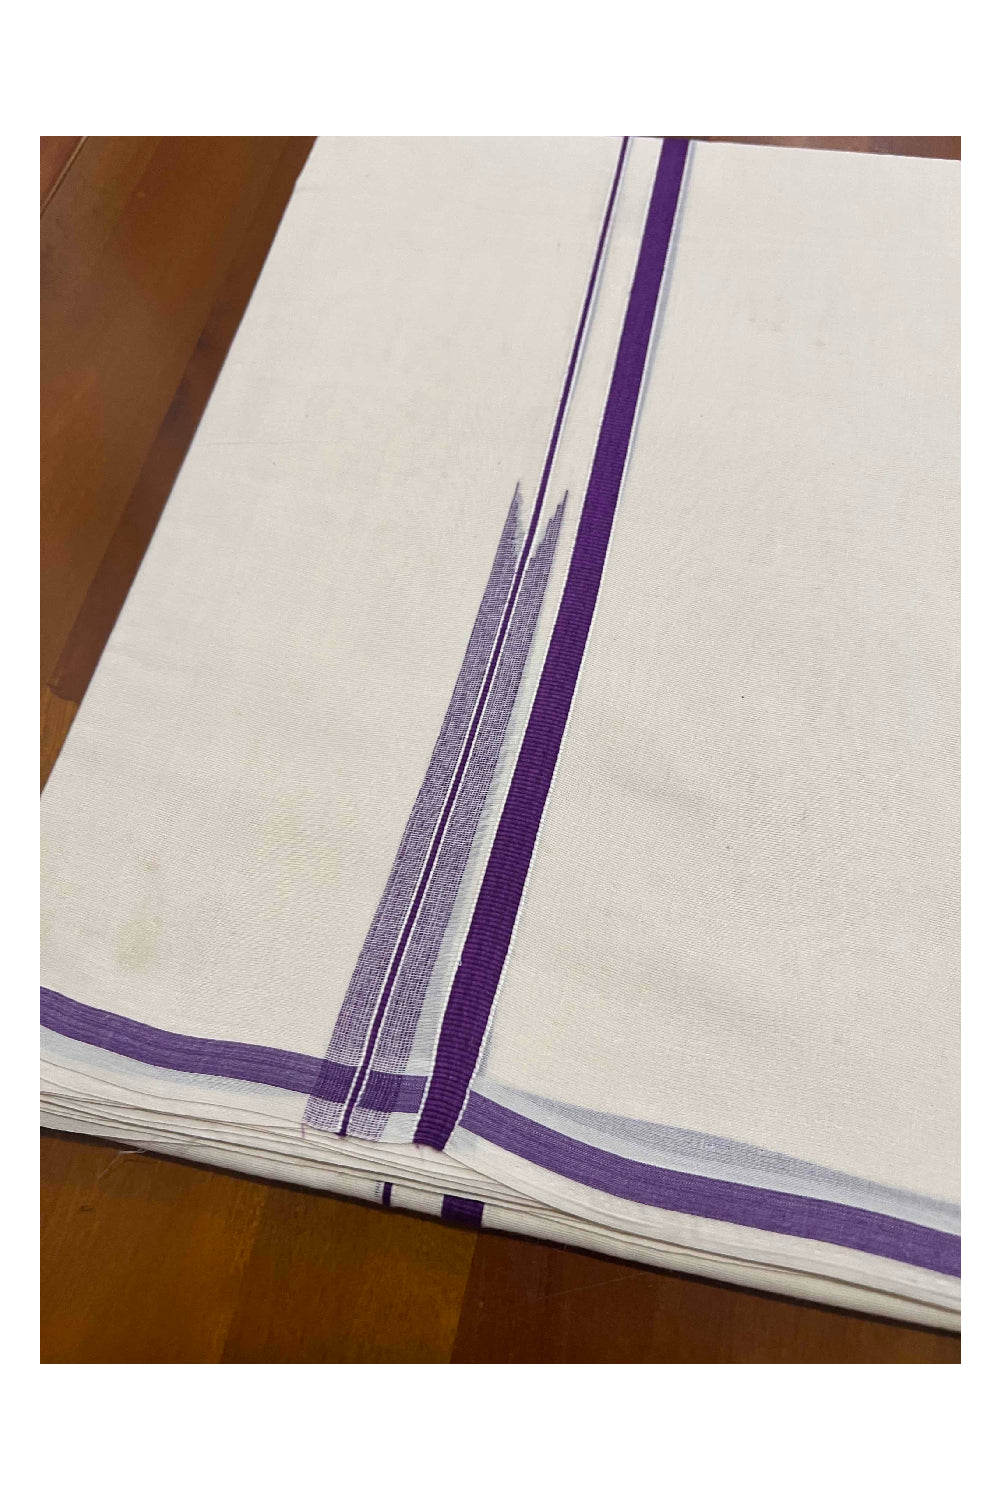 Off White Pure Cotton Double Mundu with Violet Puliyilakkara Border (South Indian Dhoti)